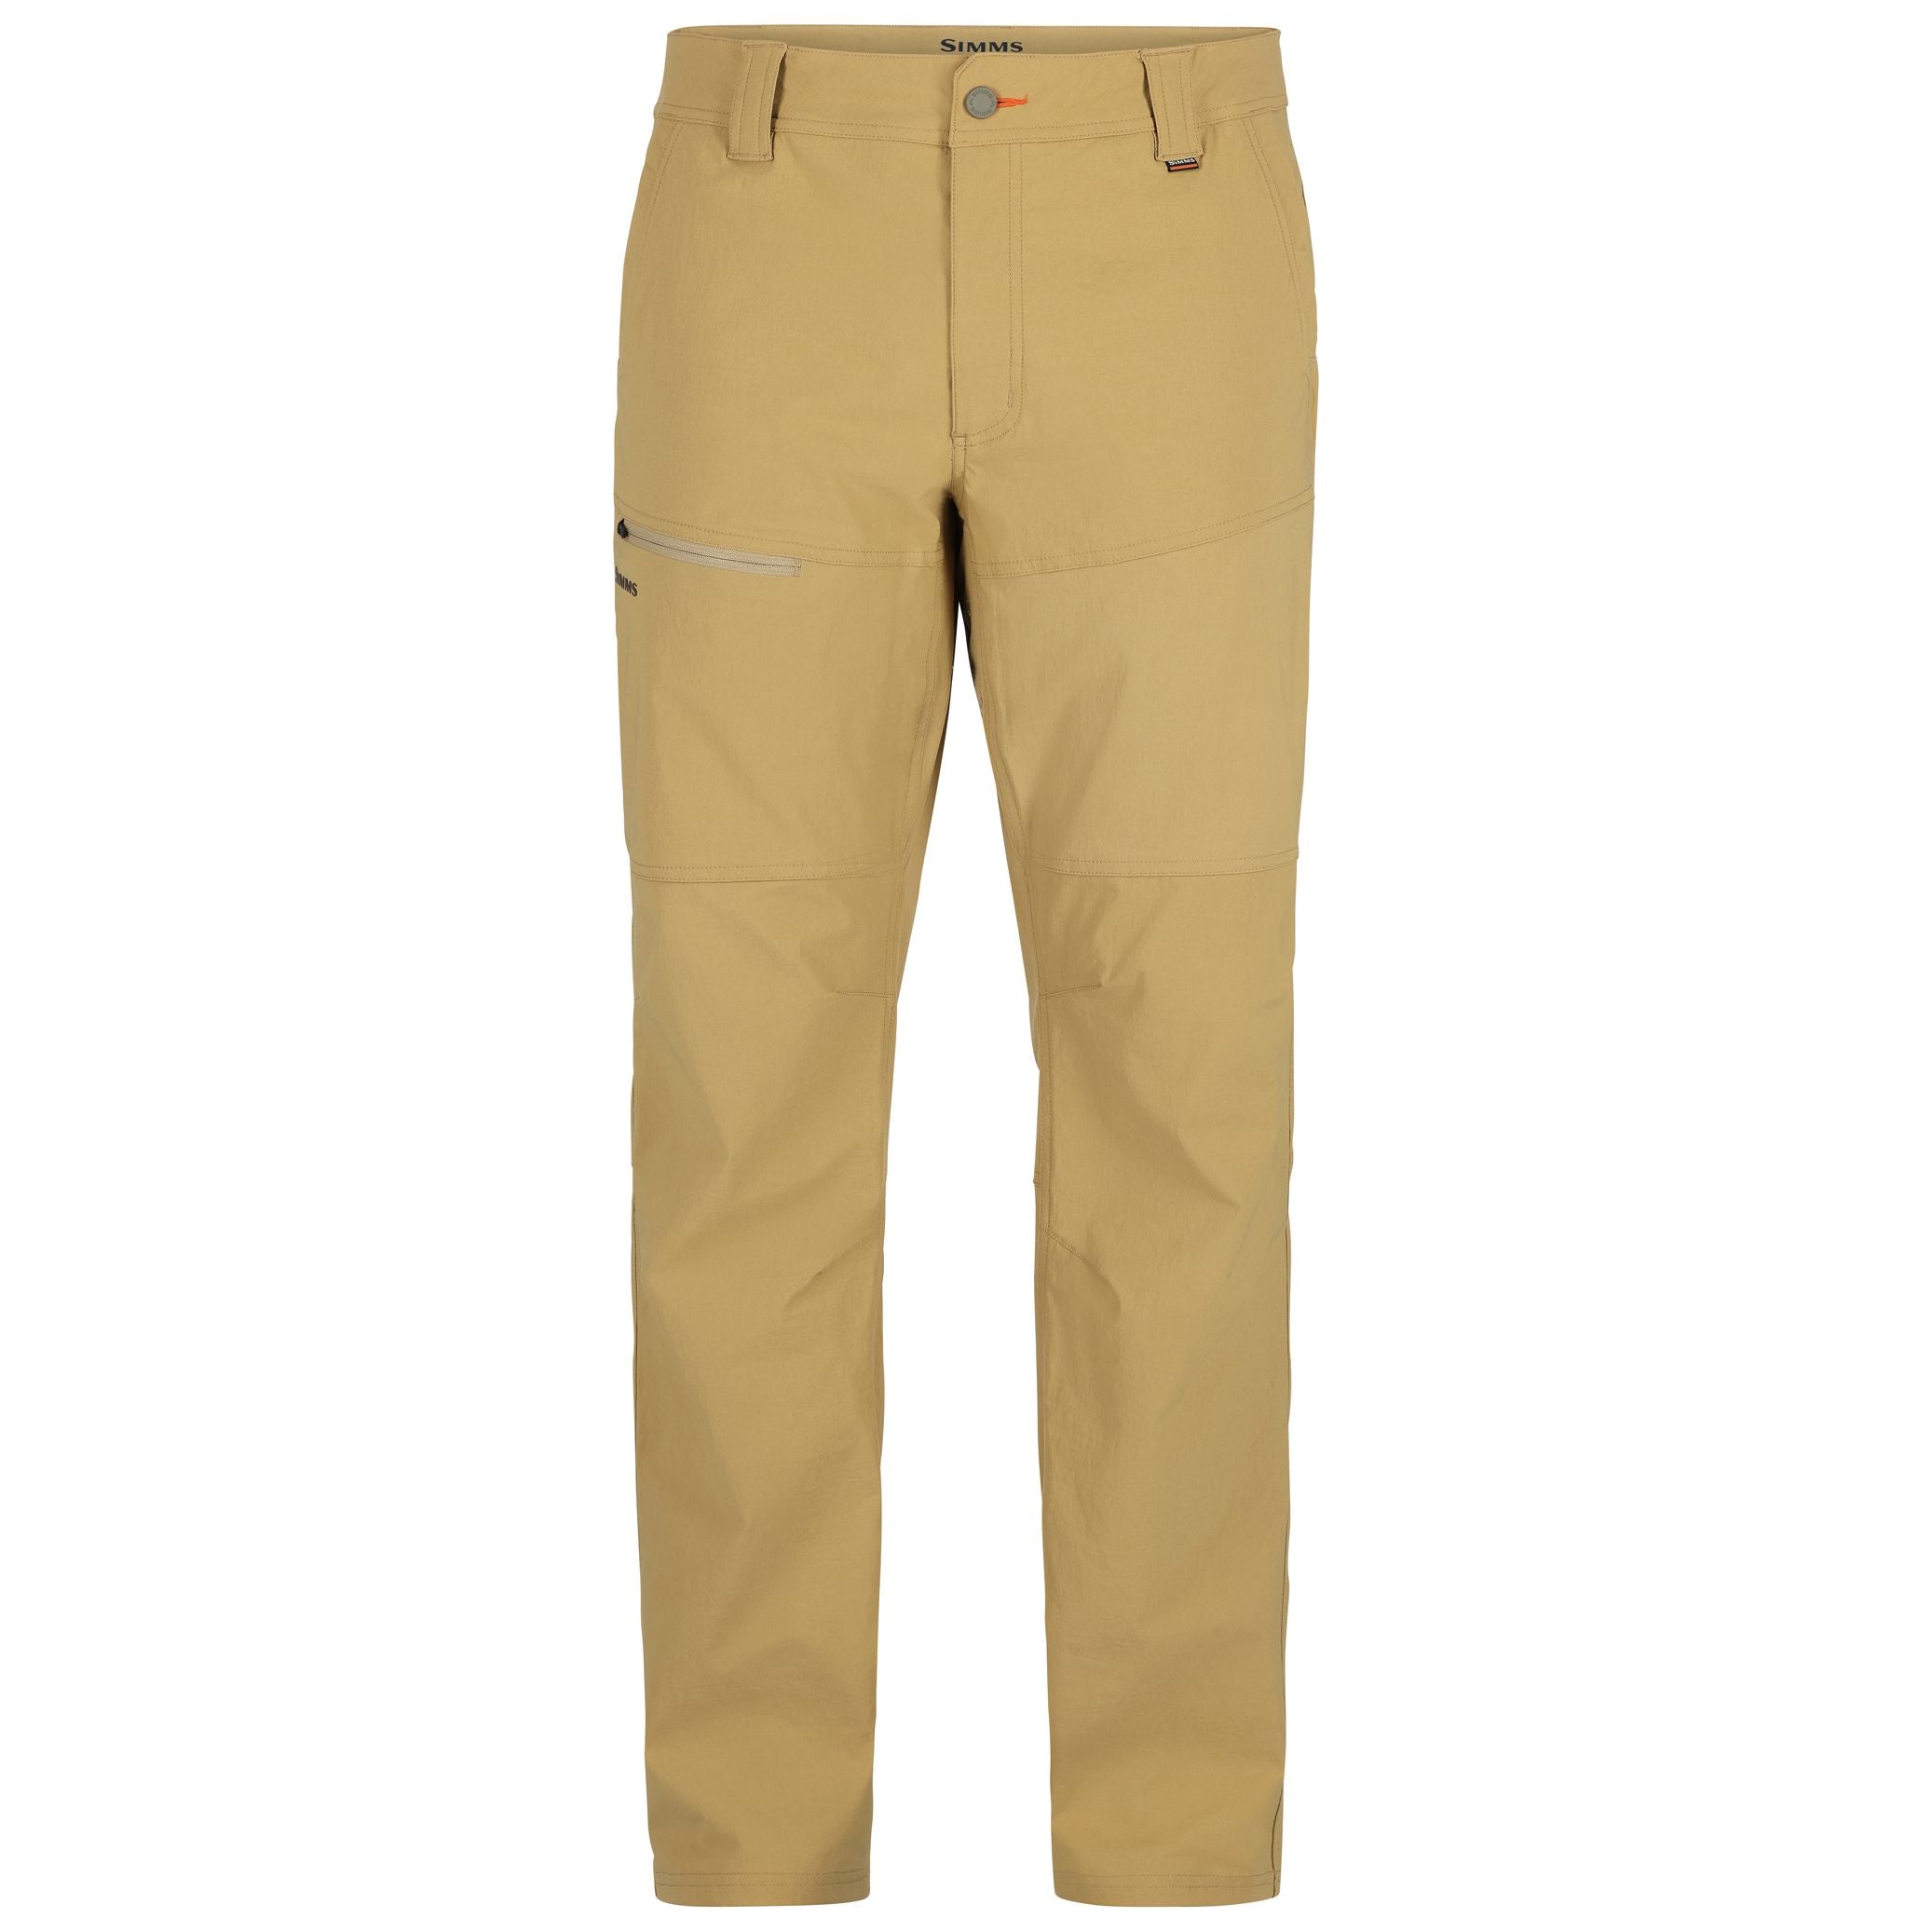 Patagonia Women's Snap-T Fleece Pants 22000_FEA_OM2 - Duranglers Fly  Fishing Shop & Guides